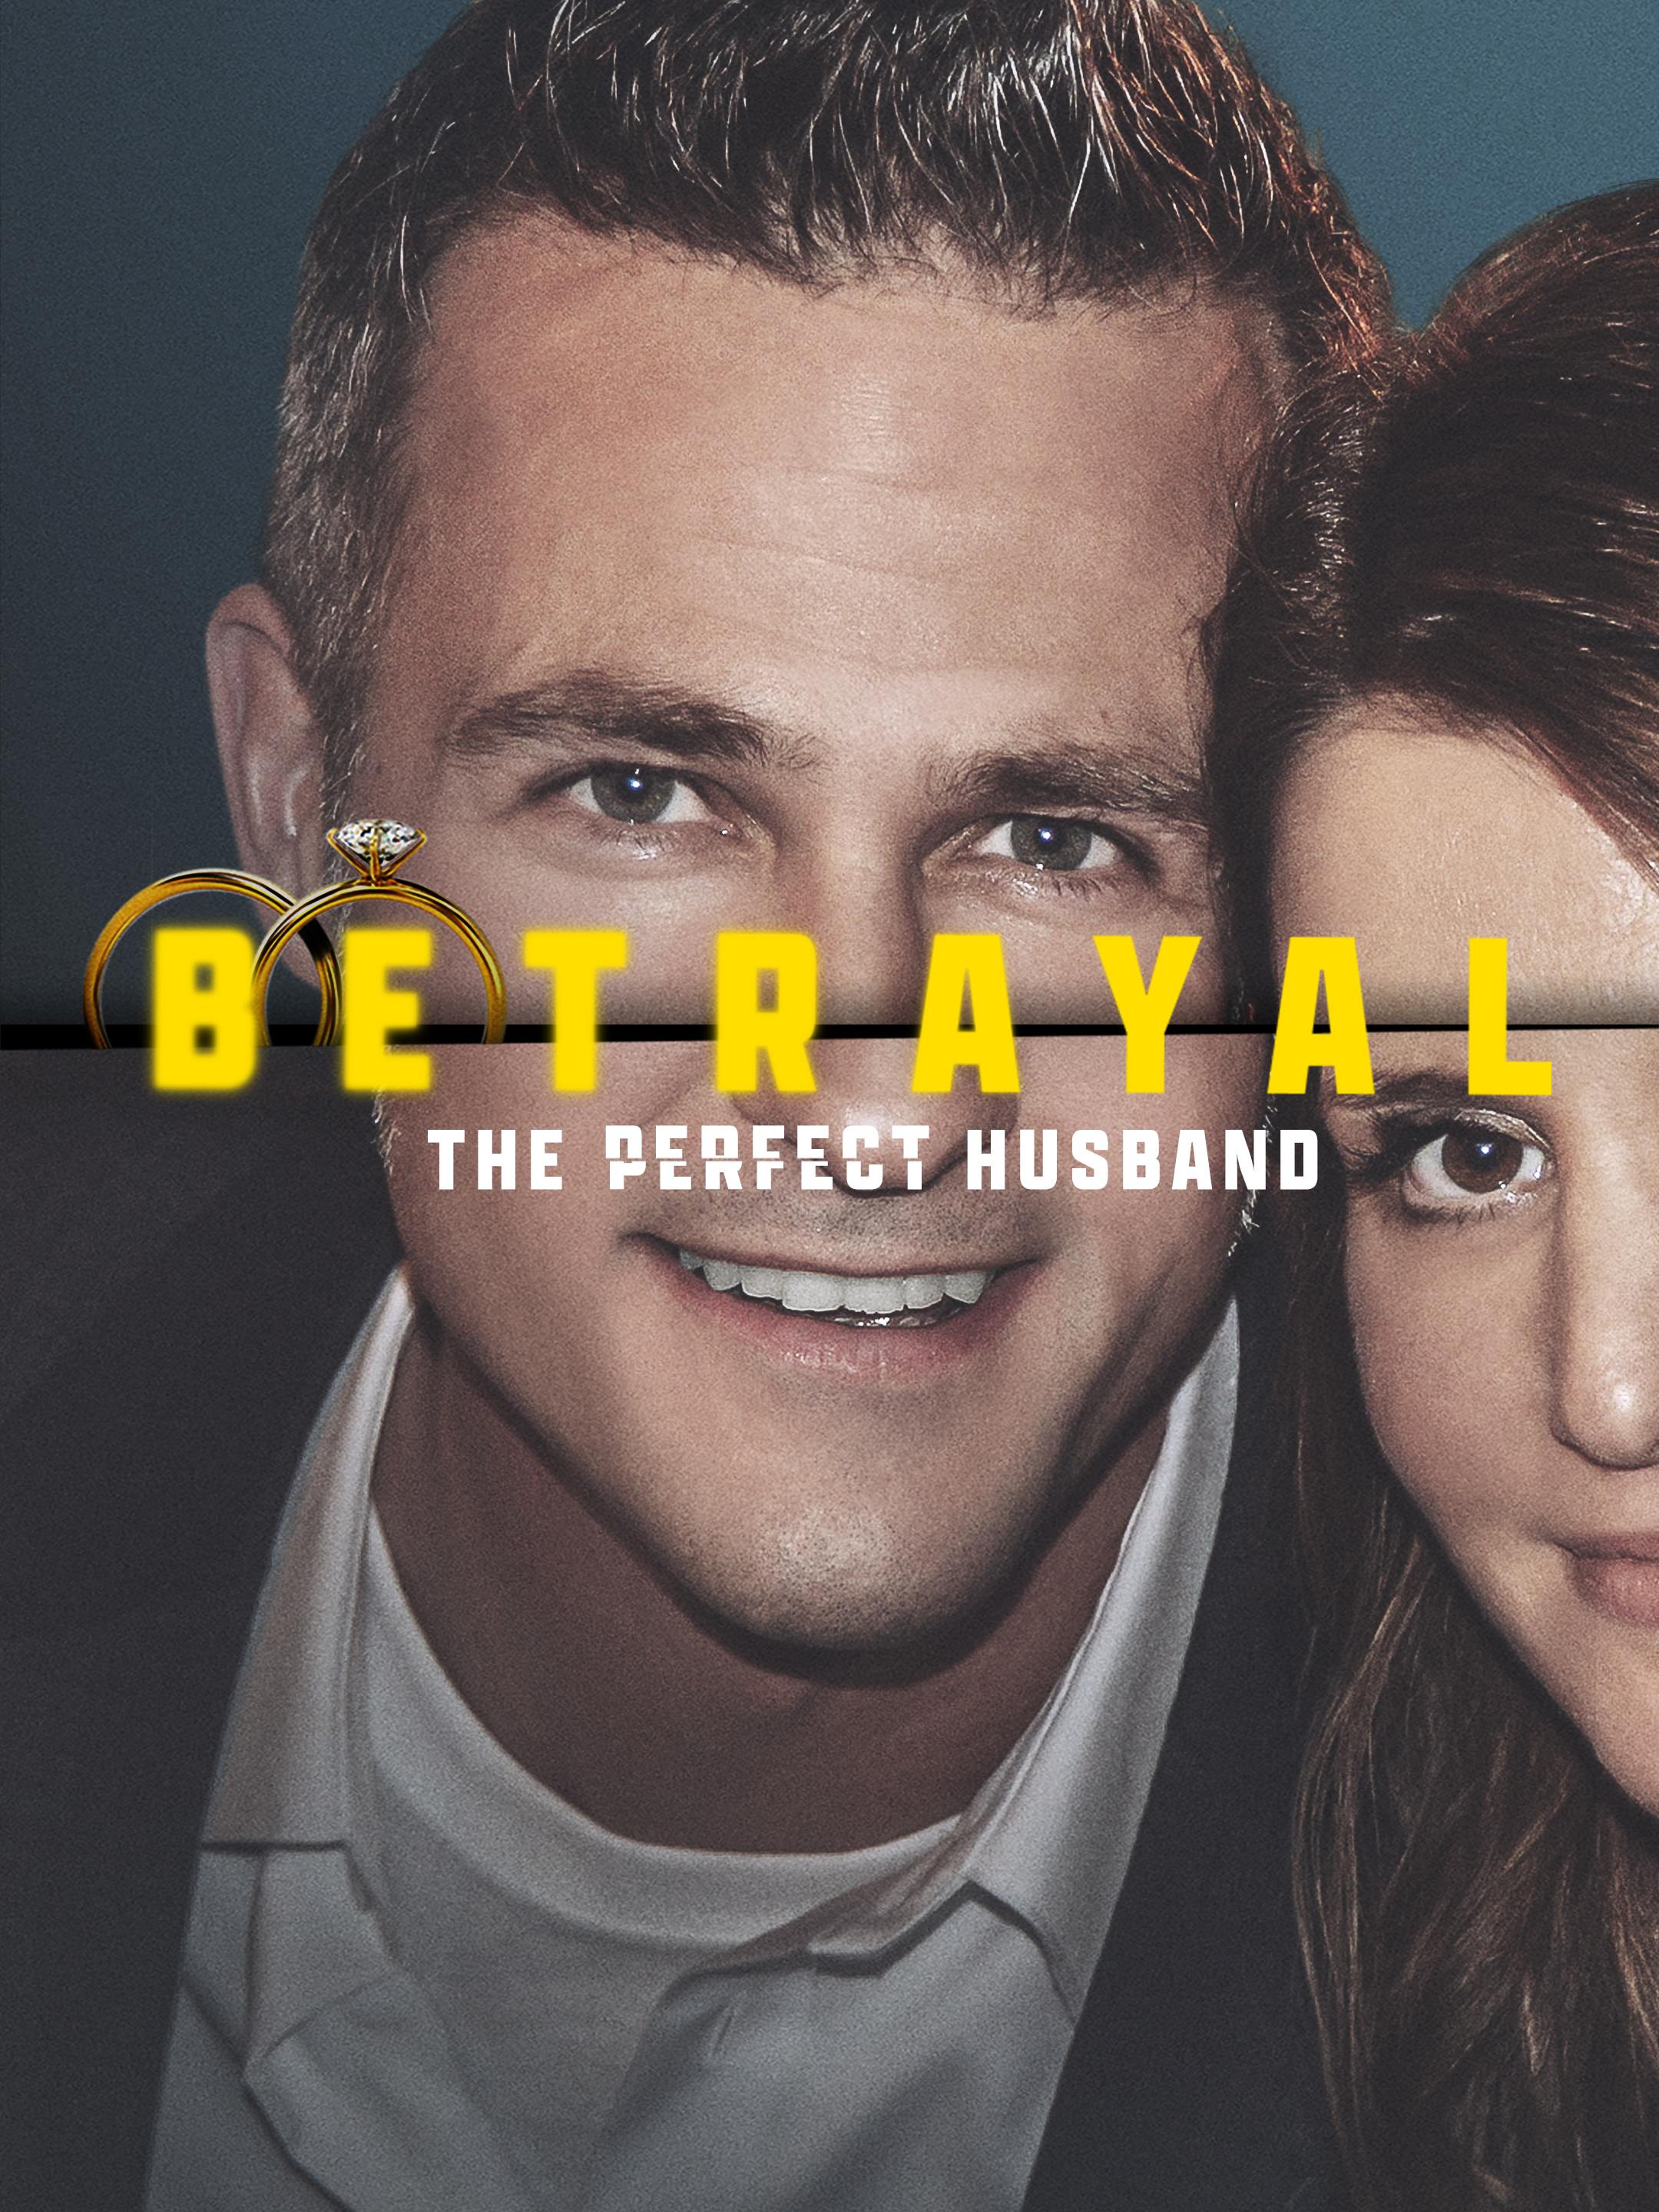 Betrayal The Perfect Husband pic picture